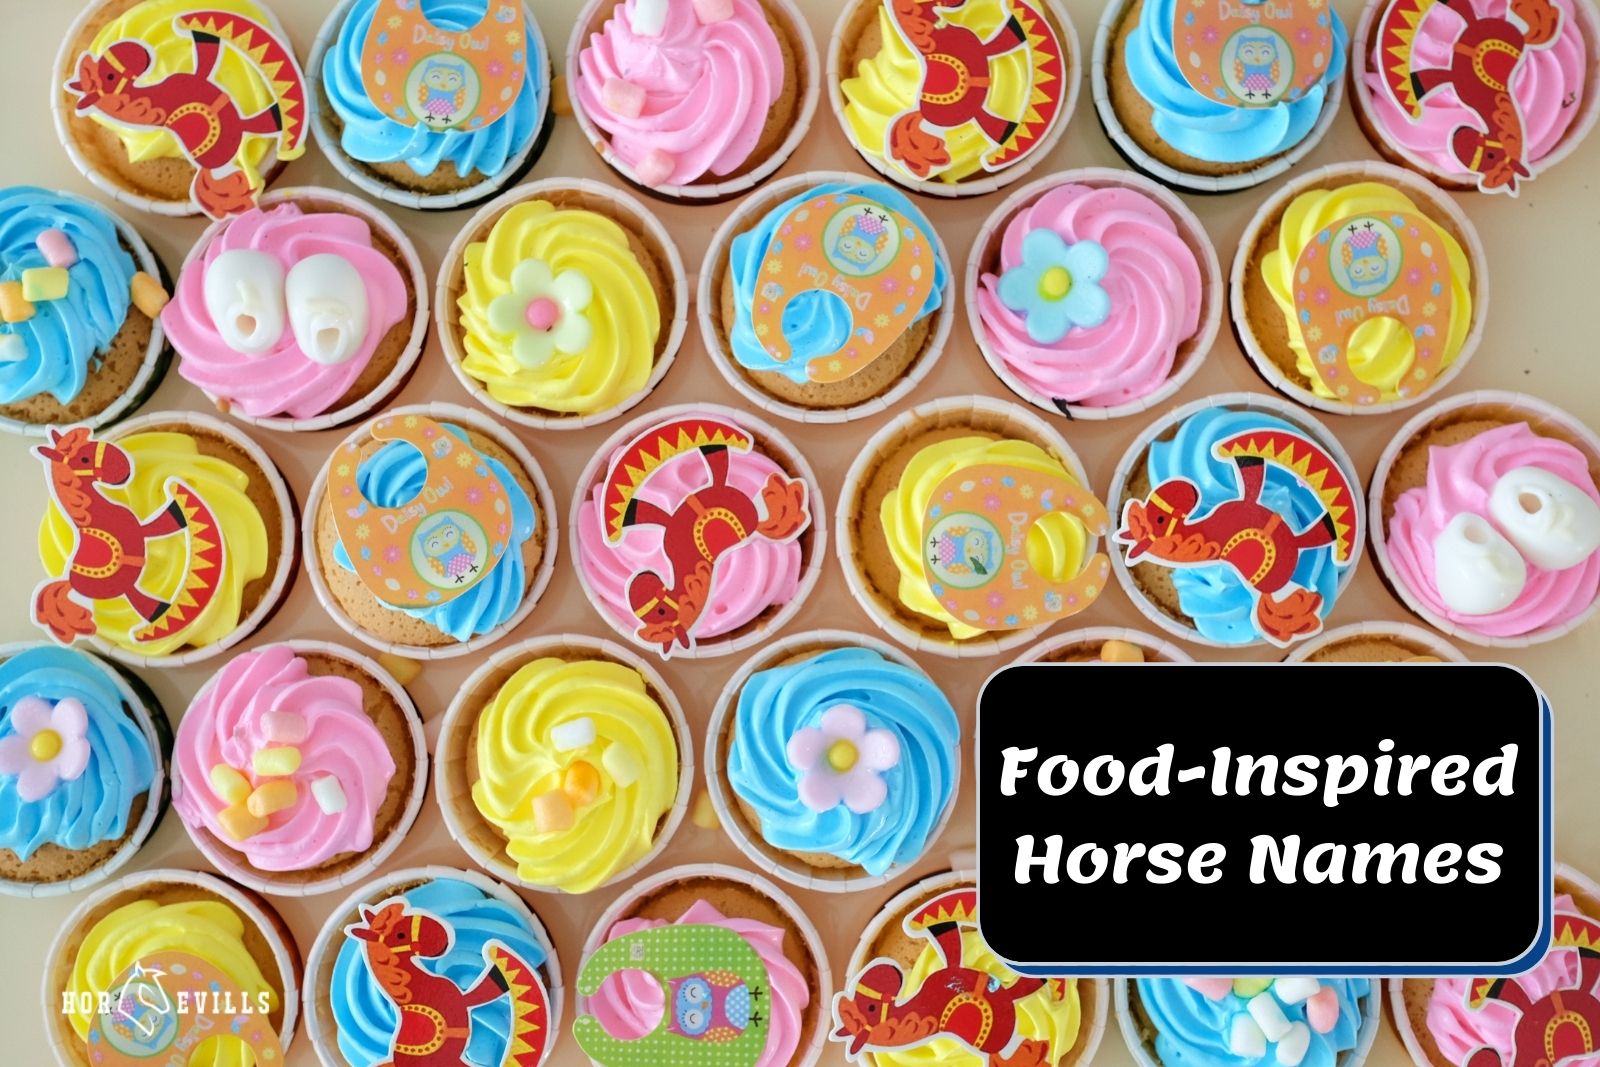 yummy cupcakes for horse food names